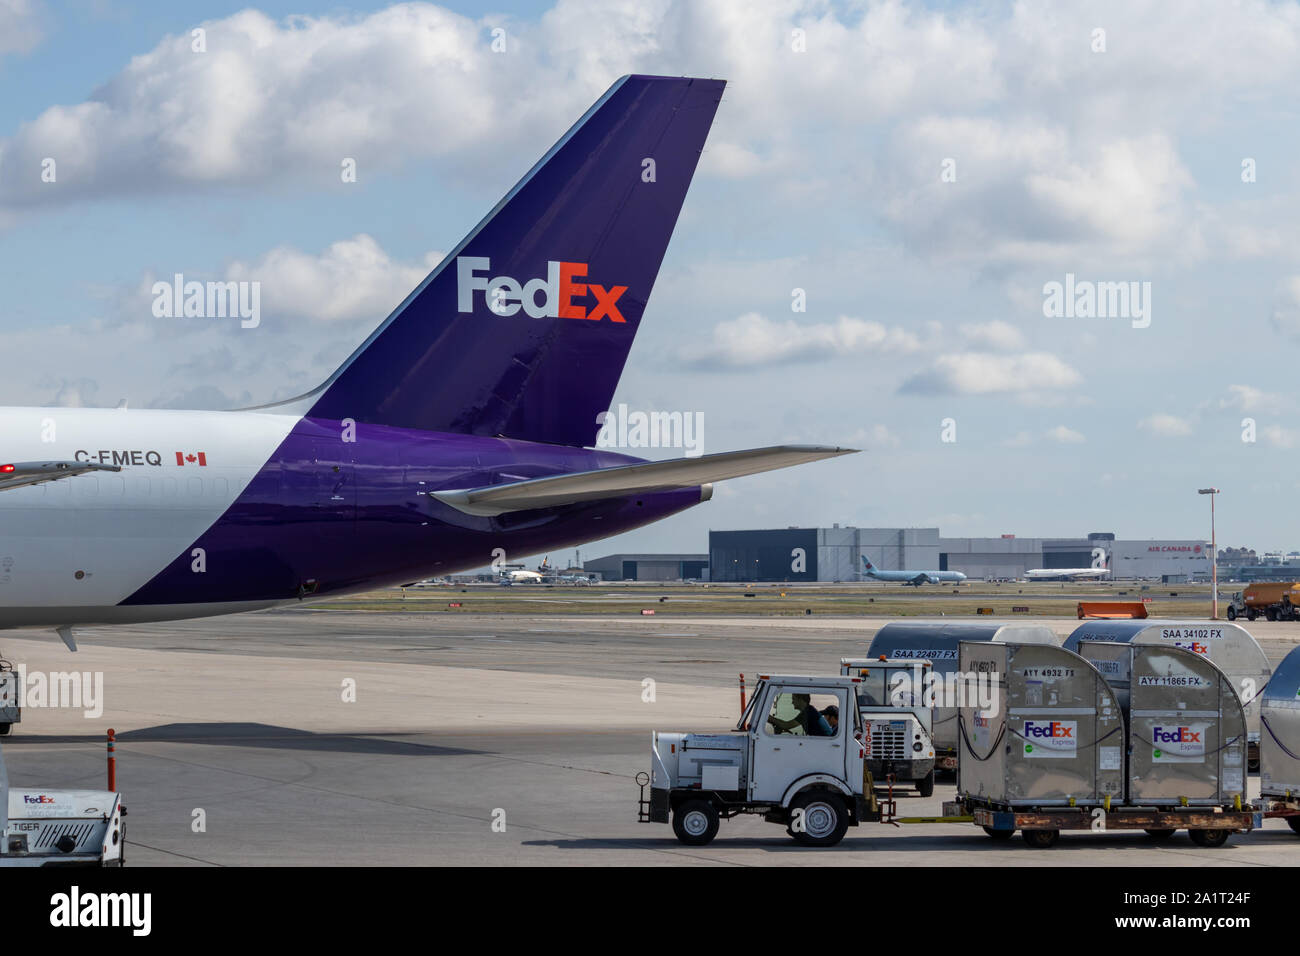 Tail of FedEx cargo plane as man drives tug with cargo containers attached at Toronto Pearson Intl. Airport. Stock Photo